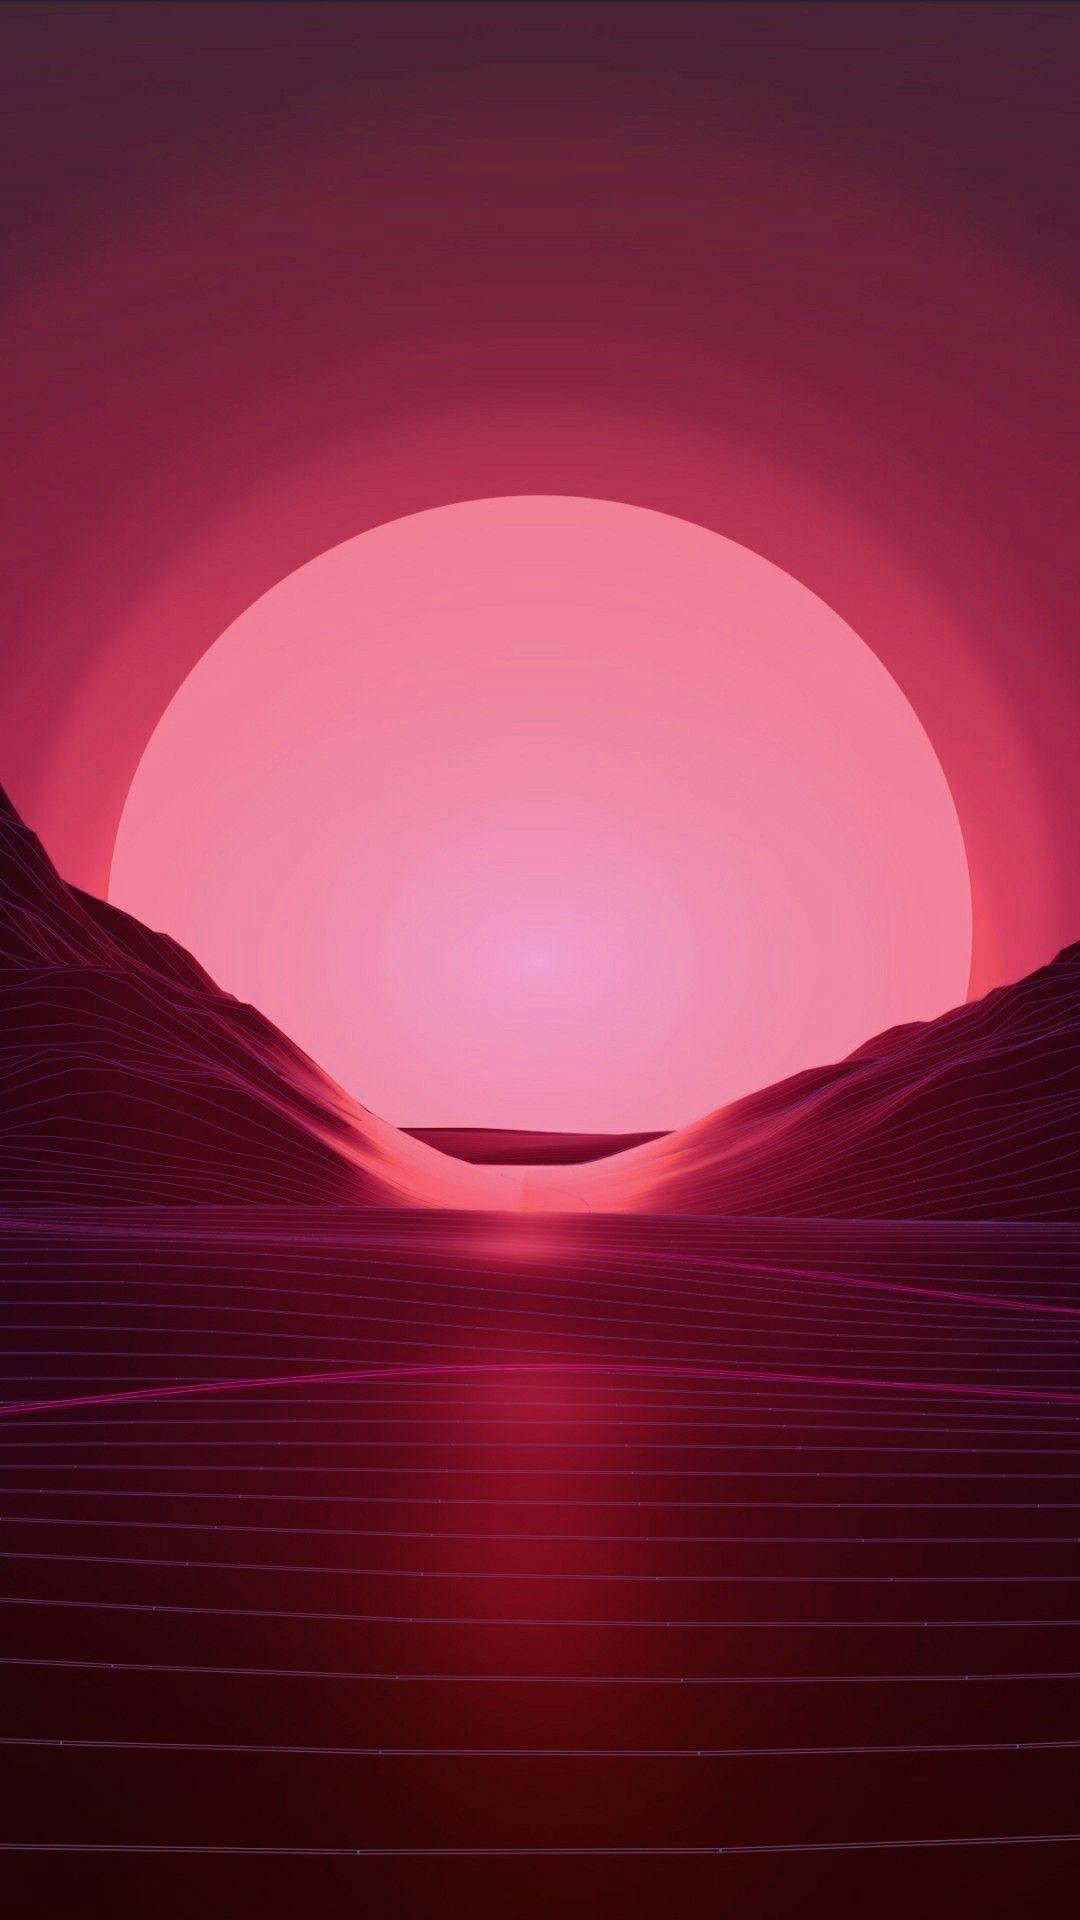 IPhone wallpaper of a pink sunset with lines and mountains - IPhone red